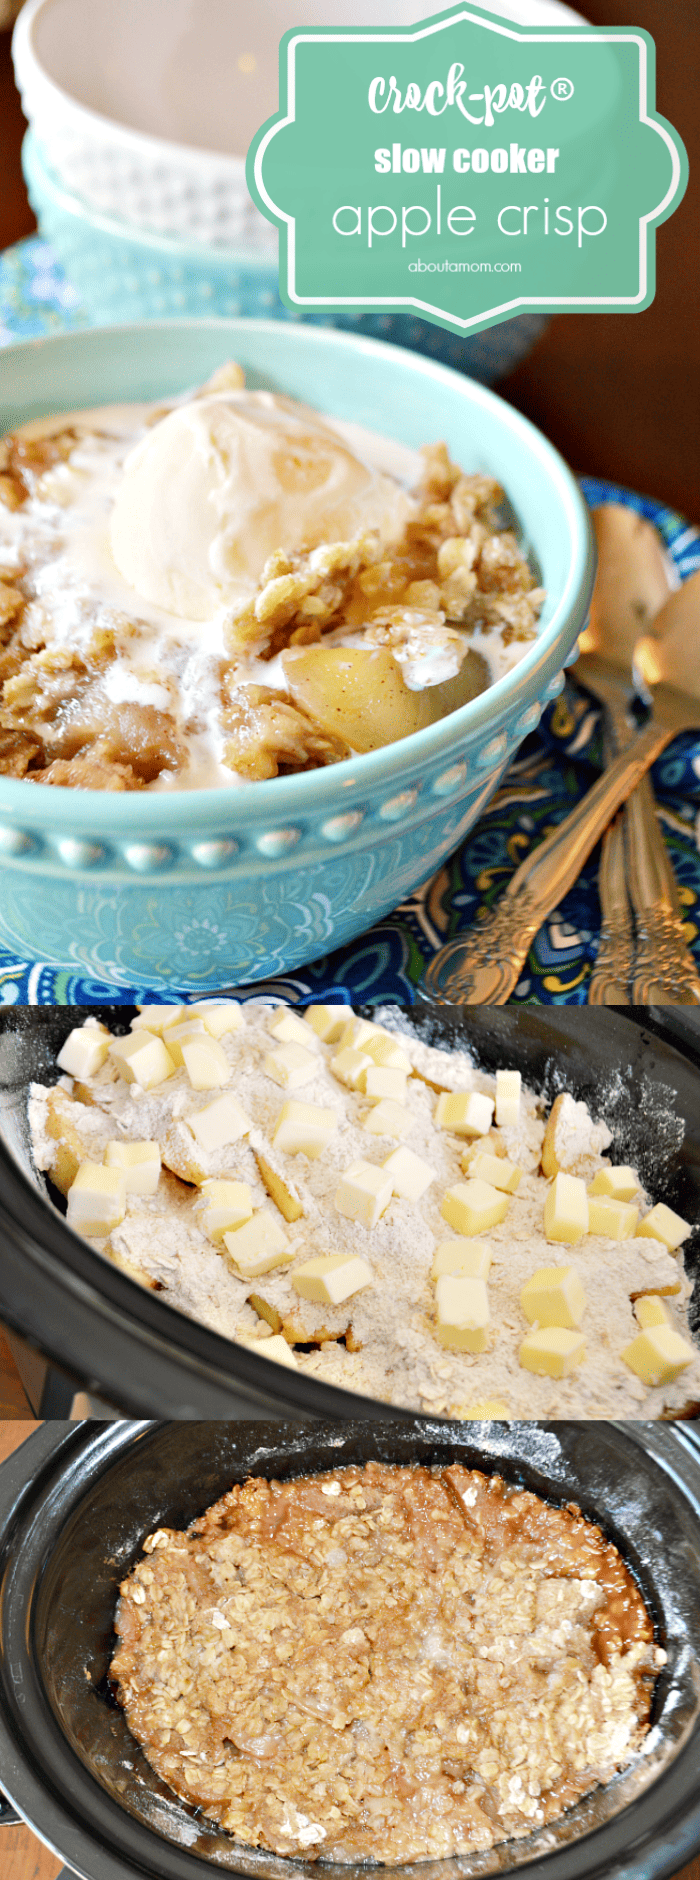 Slow Cooker Apple Crisp is a warm and comforting fall dessert that is easy to prepare. This Crock Pot dessert is exactly the type of recipe you want on a chilly fall day.